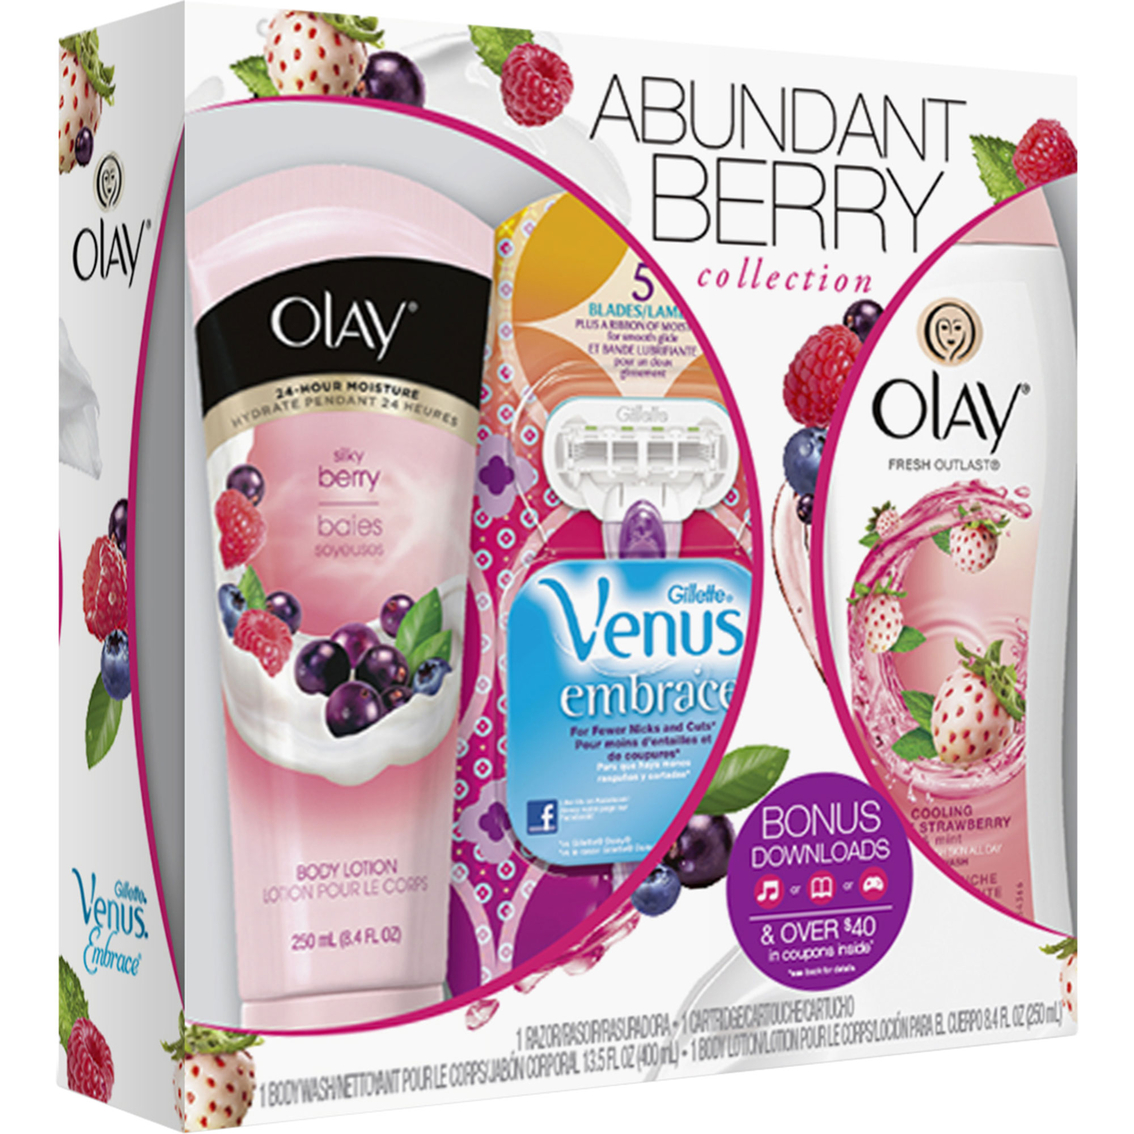 Olay Abundant Berry Collection Body & Bath Gift Sets Beauty & Health Shop The Exchange